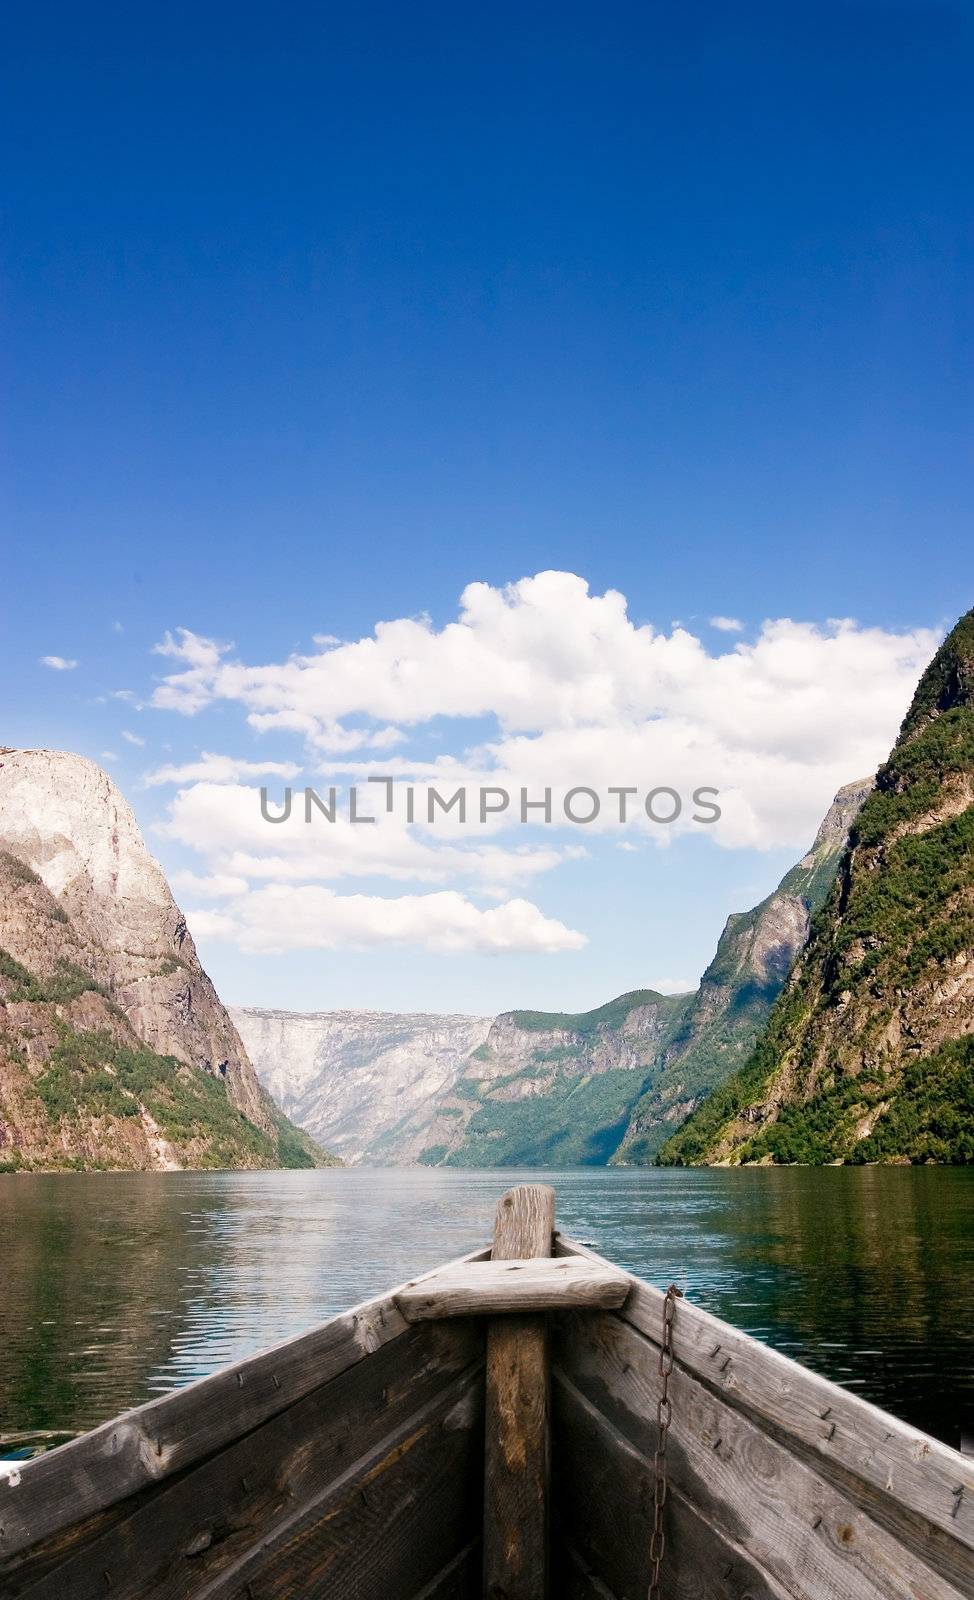 An old boat on a majestic norwegian fjord